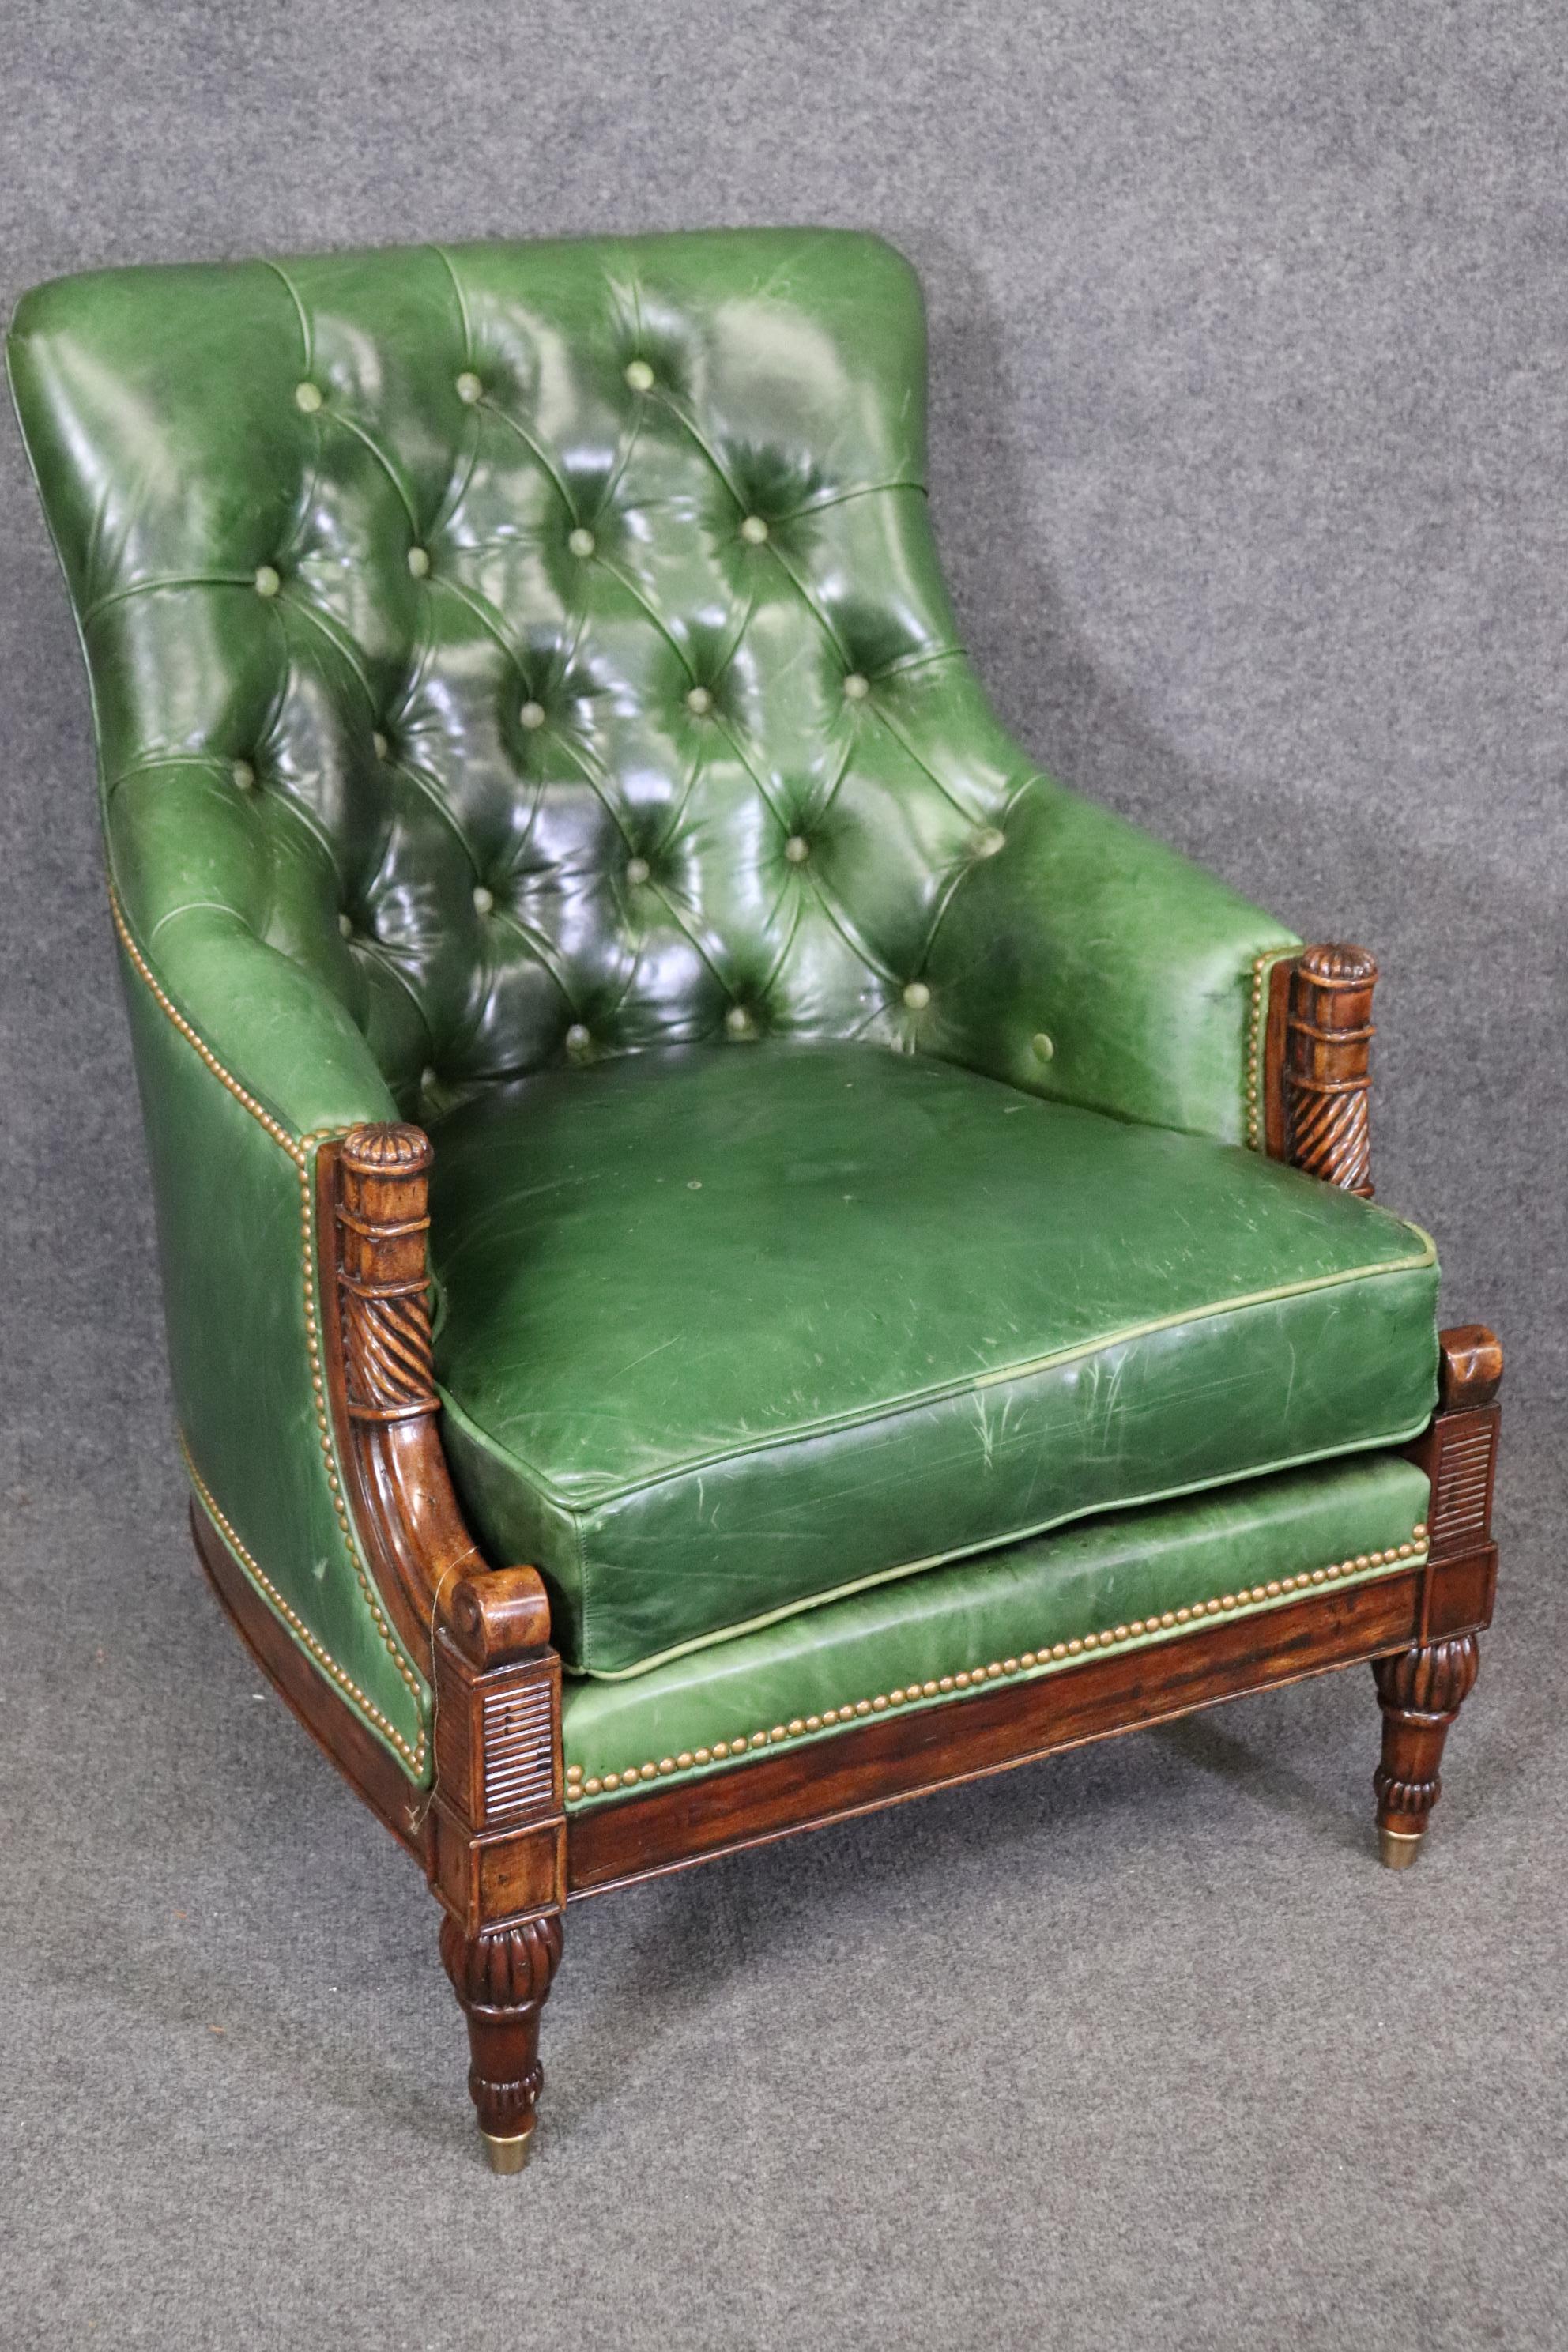 This is a spectacular pair of green leather Edwardian style Theodore Alexander mahogany club or bergere chairs. The chairs are in good original condition and will show minor signs of age and use but nothing significant. The chairs aren't that old